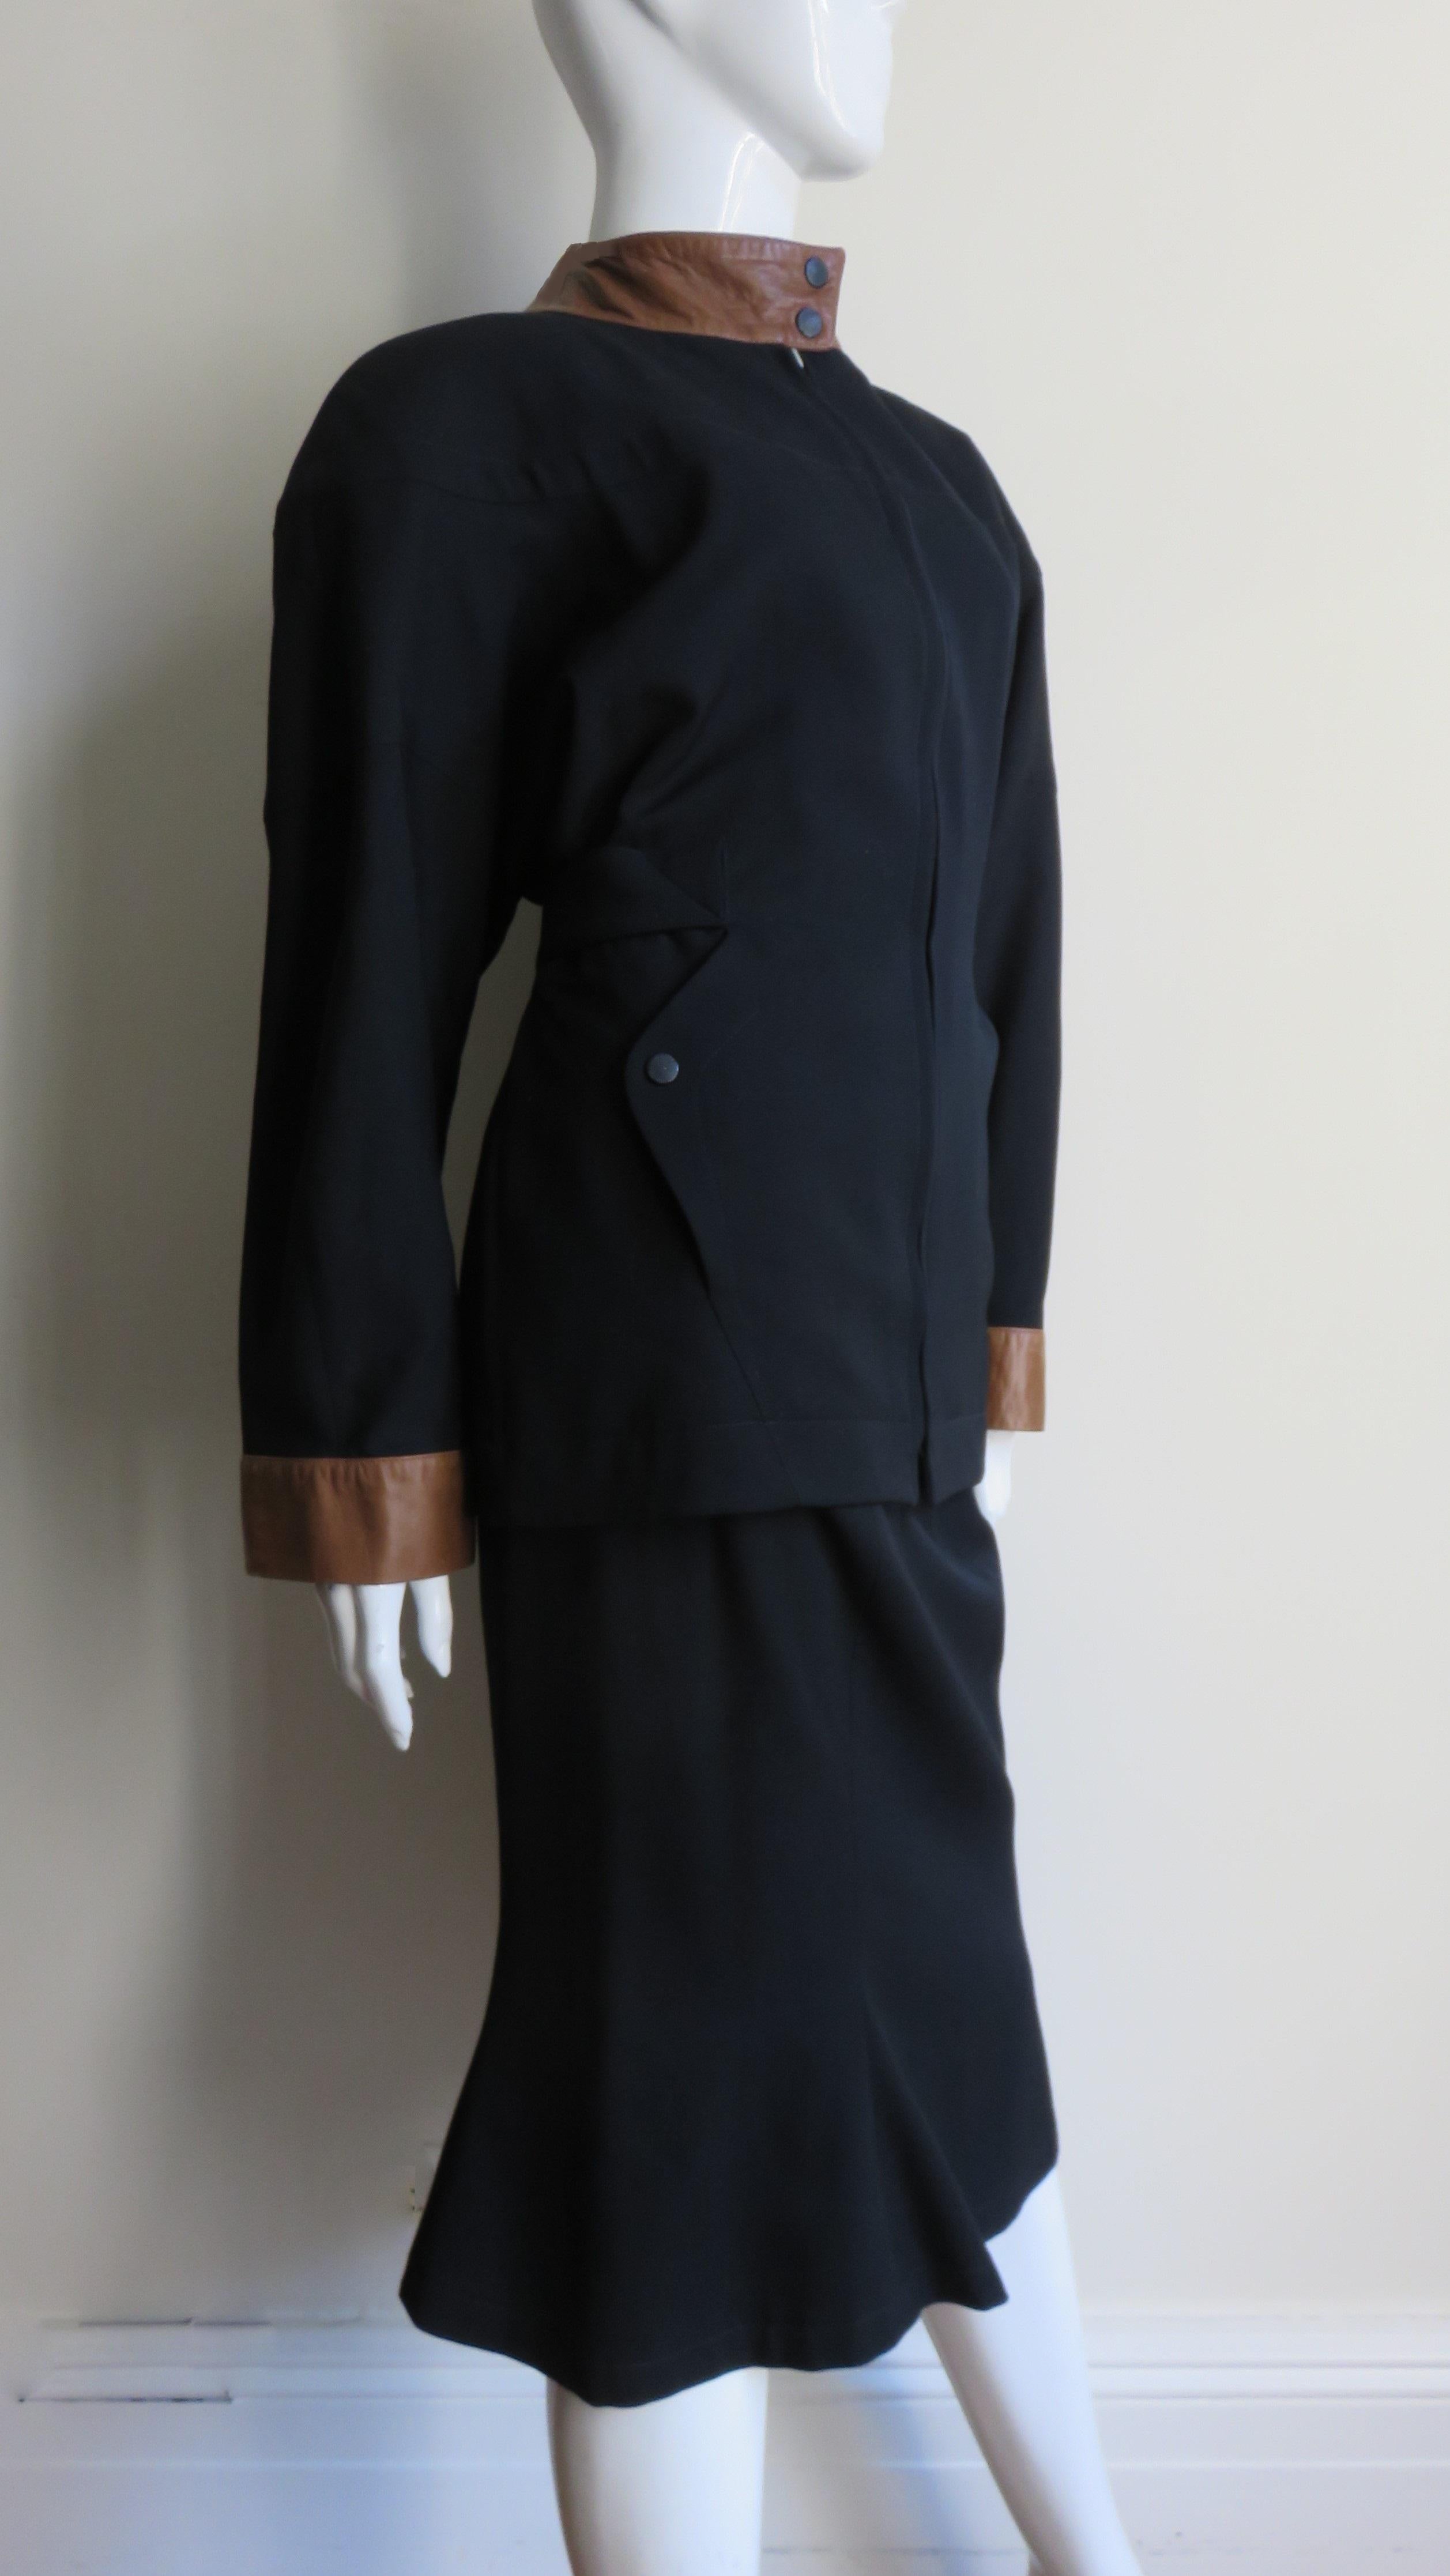 Thierry Mugler Skirt and Jacket Suit with Leather Trim 2